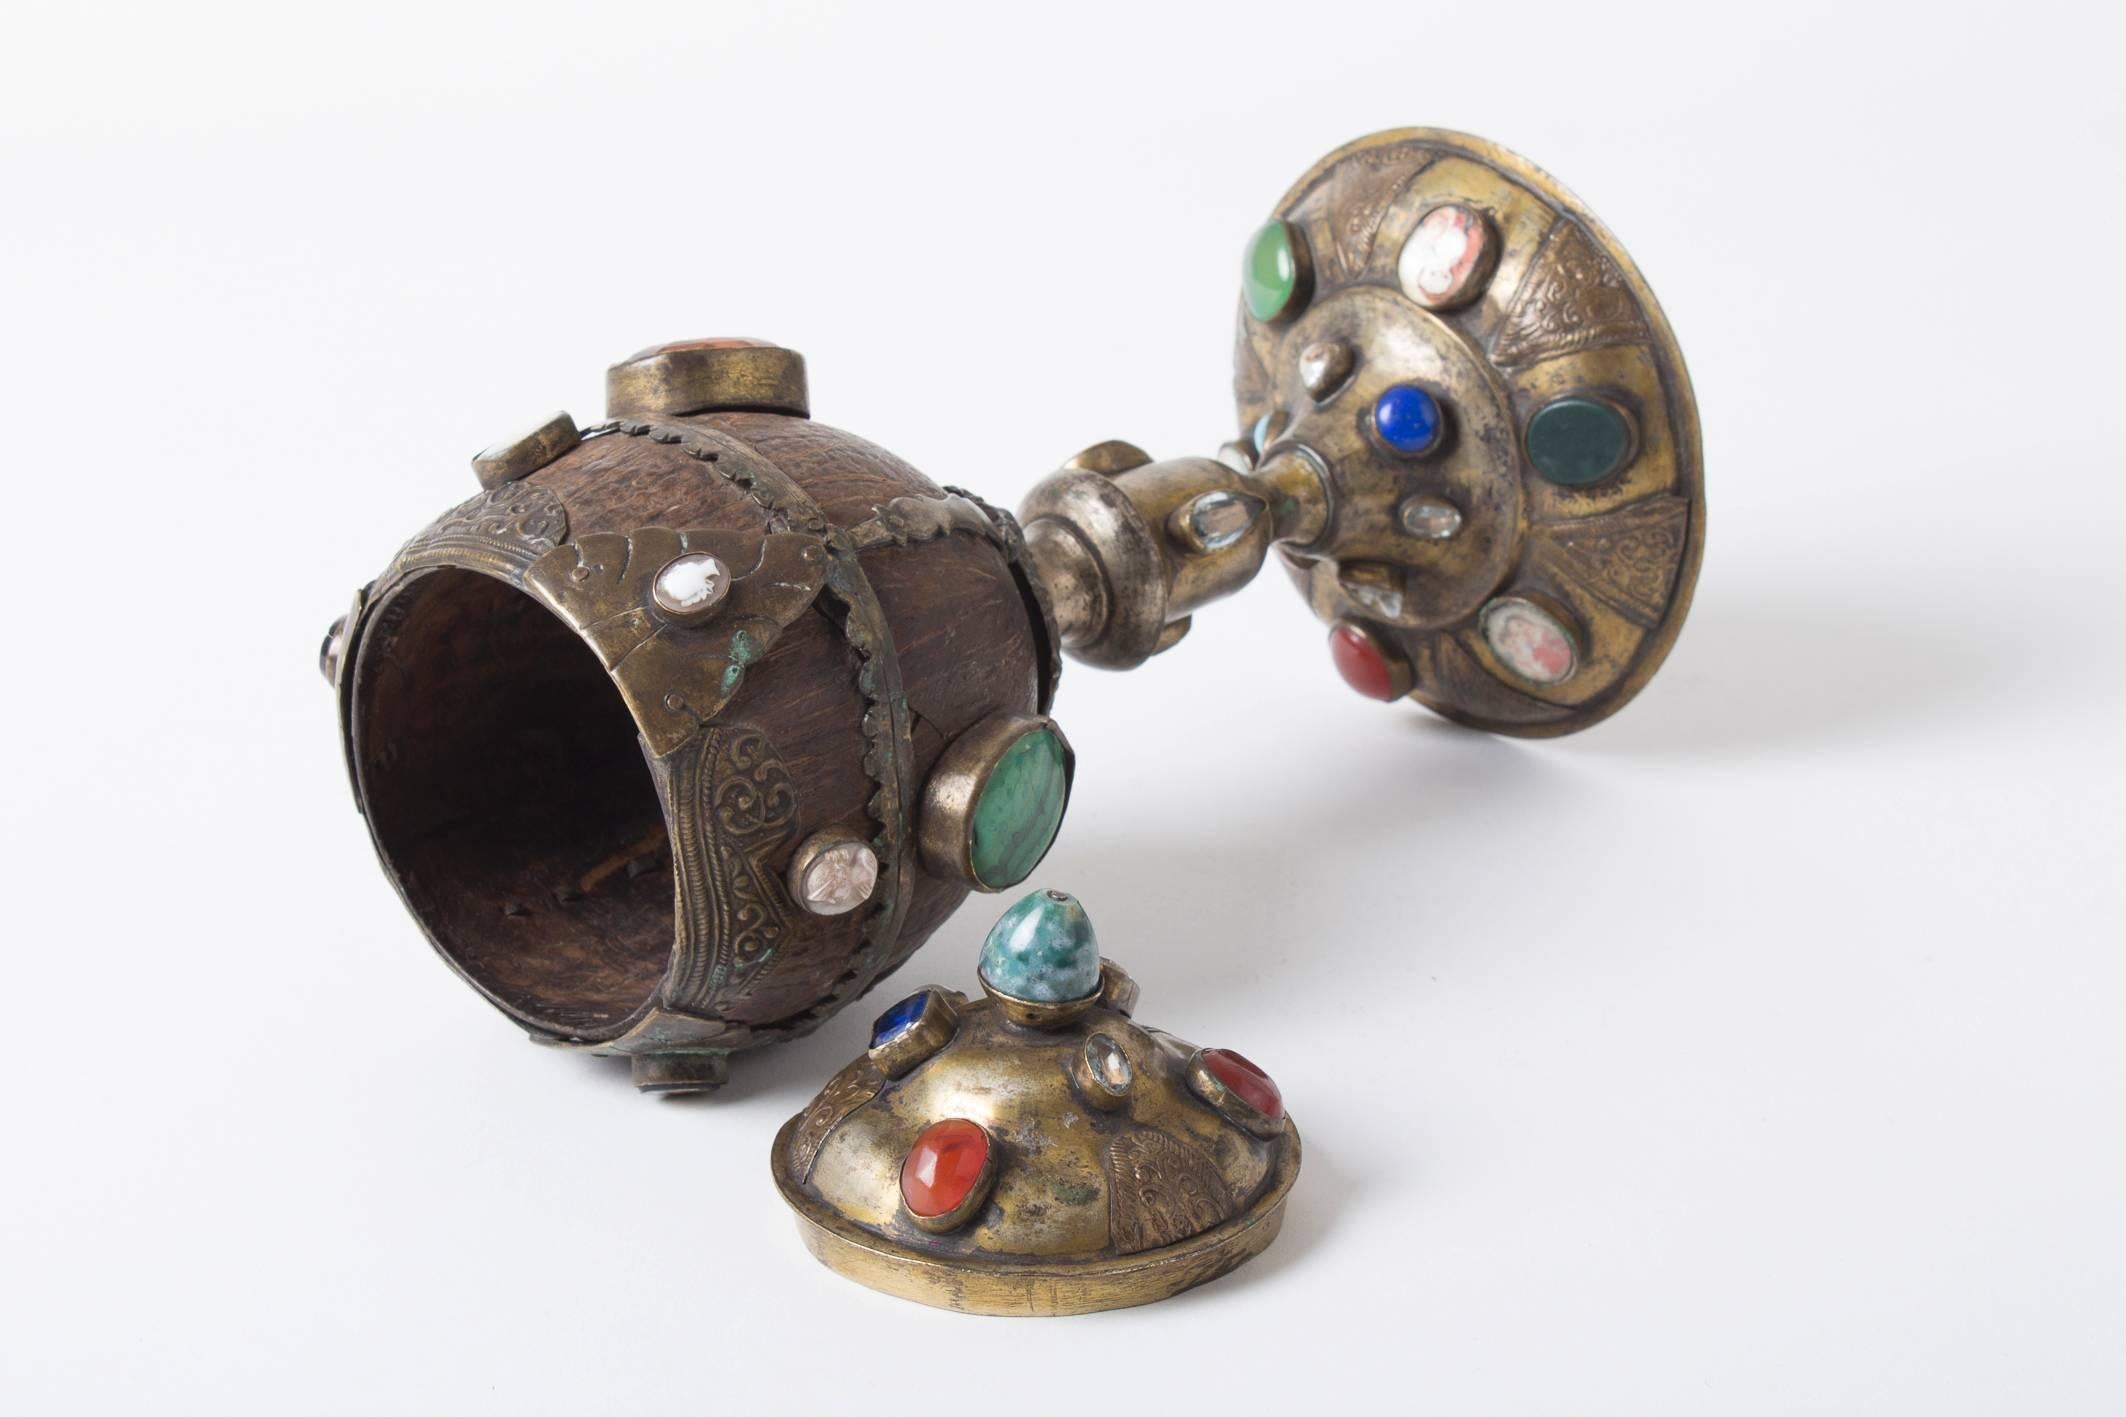 A Coconut Cup, with numerous mounted semi-precious stones like 

carnelian, rock crystal malachite, colorless topaz, aquamarine, lapis lazuli, further 3 beautiful baroque water pearls, 2 glass stones , 3 gems or cameos, 2 micro-mosaics with semi-